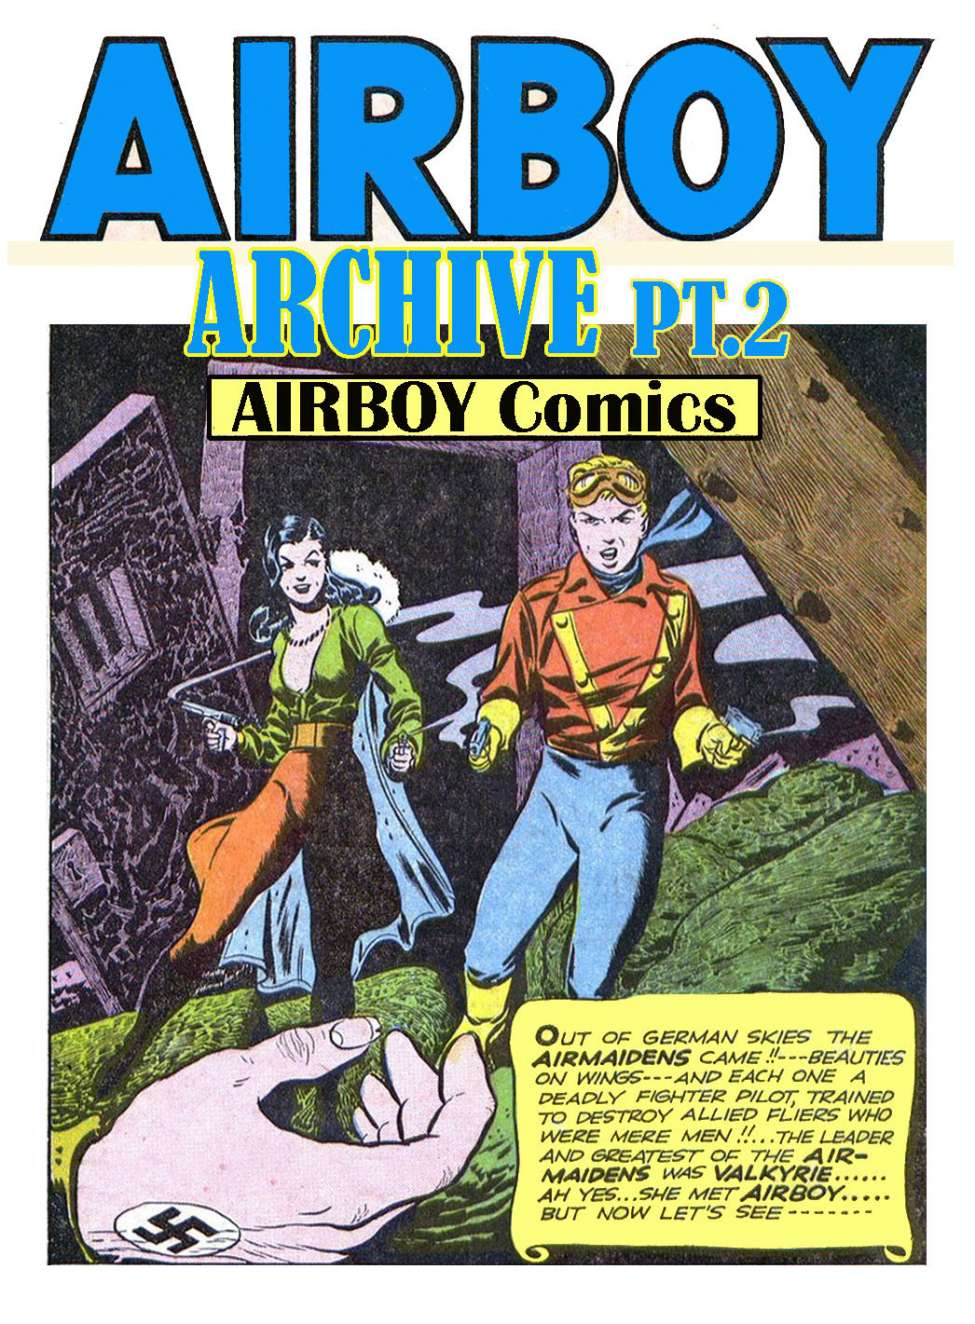 Book Cover For Airboy Archive Part 2